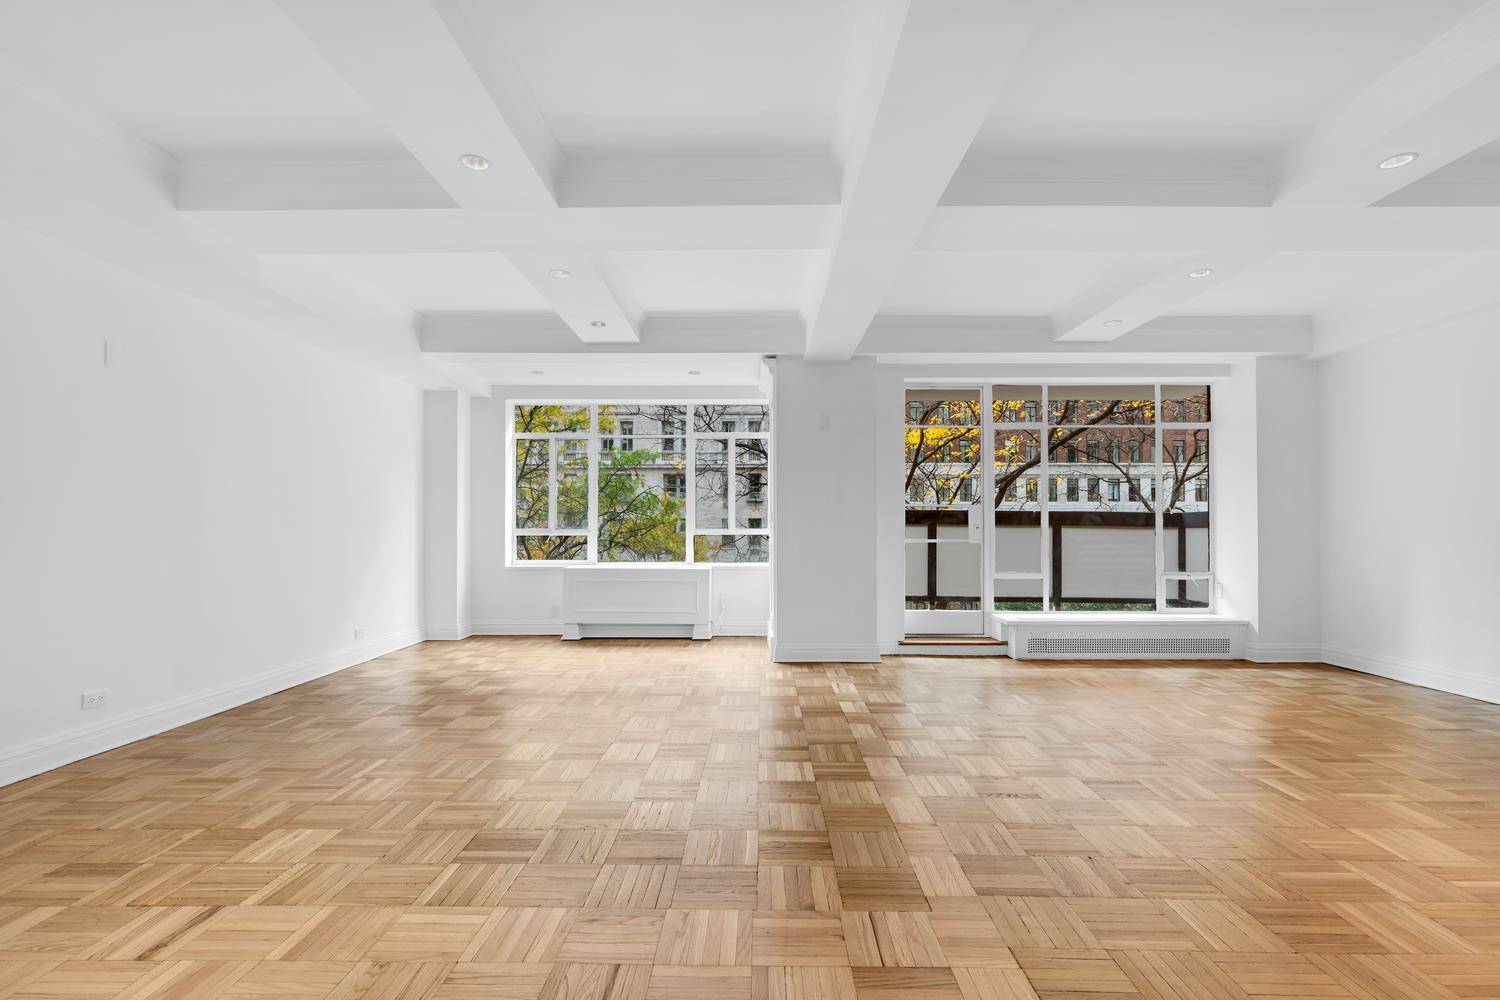 Located on Park Avenue and 72nd on a particularly prestigious section of the beloved boulevard, this building is proximate to some of the most elegant and exclusive residential buildings in ...